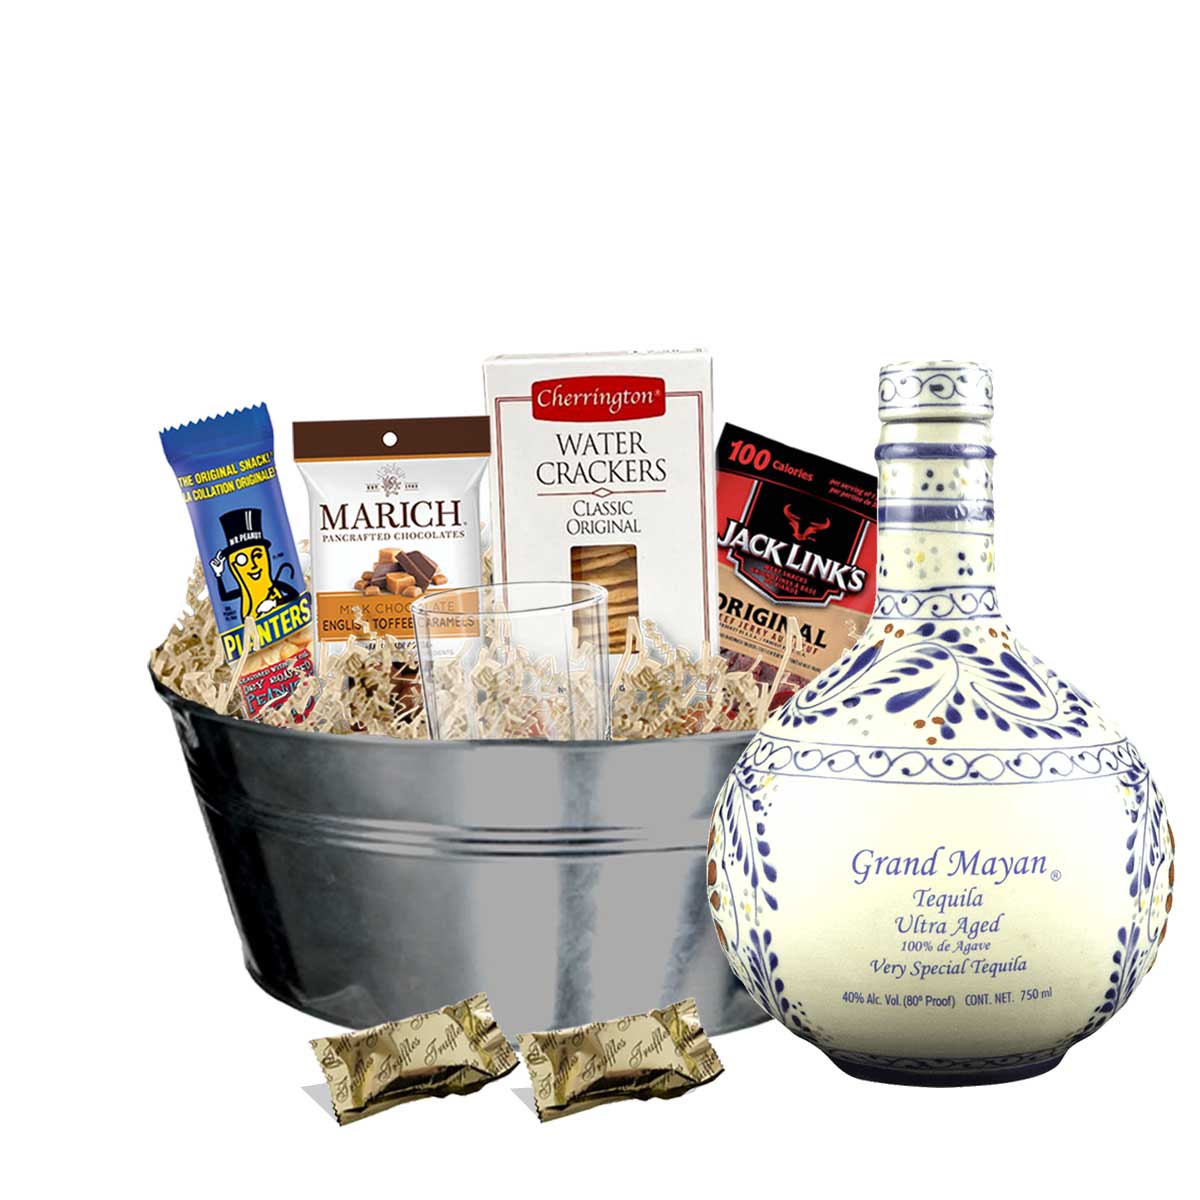 TAG Liquor Stores BC - Grand Mayan Ultra Aged Tequila 750ml Gift Basket